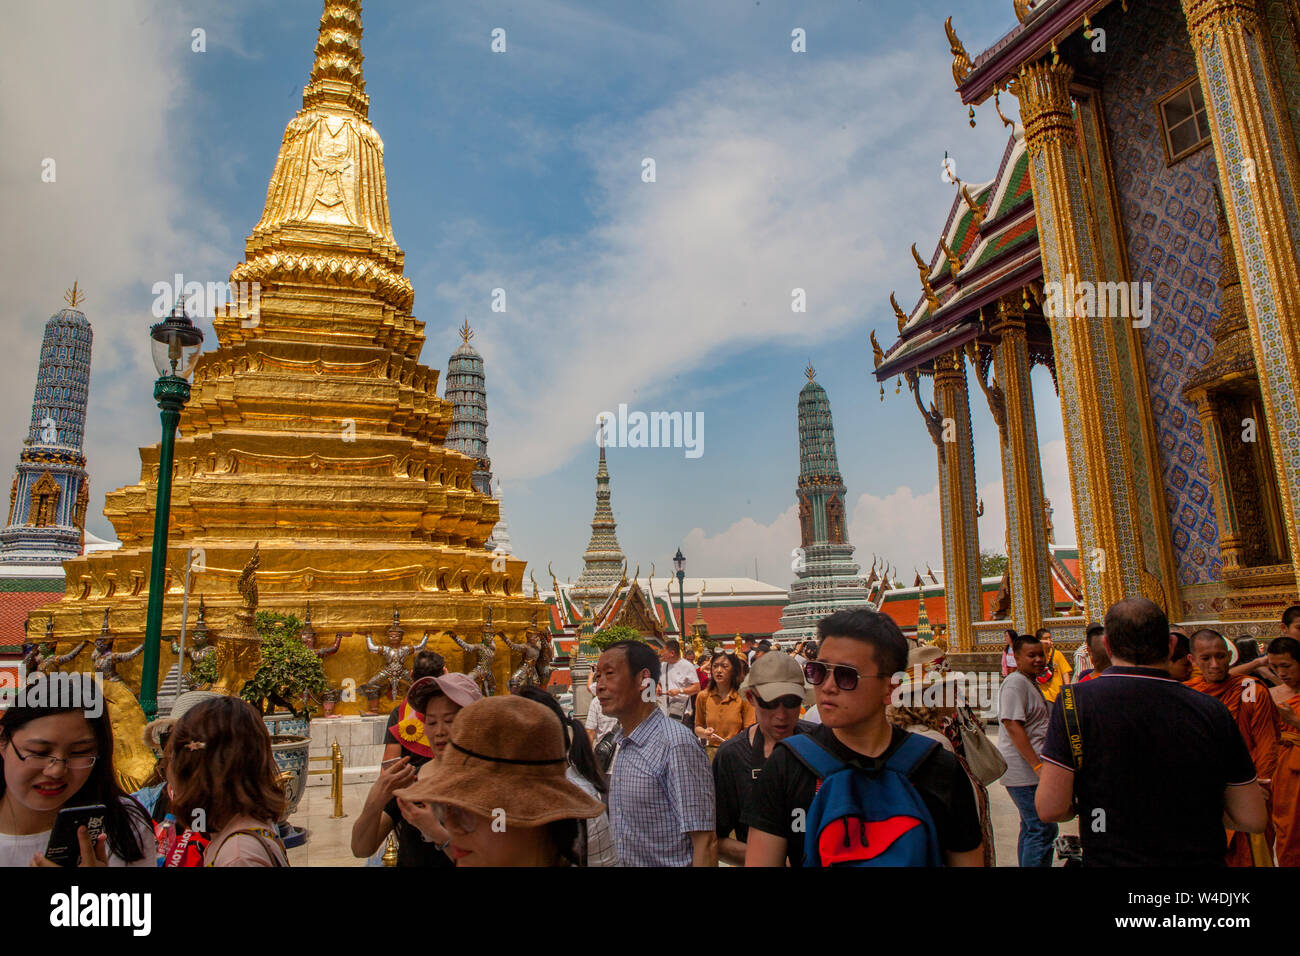 Crowds of people touring the Grand Palace in Bangkok, Thailand. Stock Photo